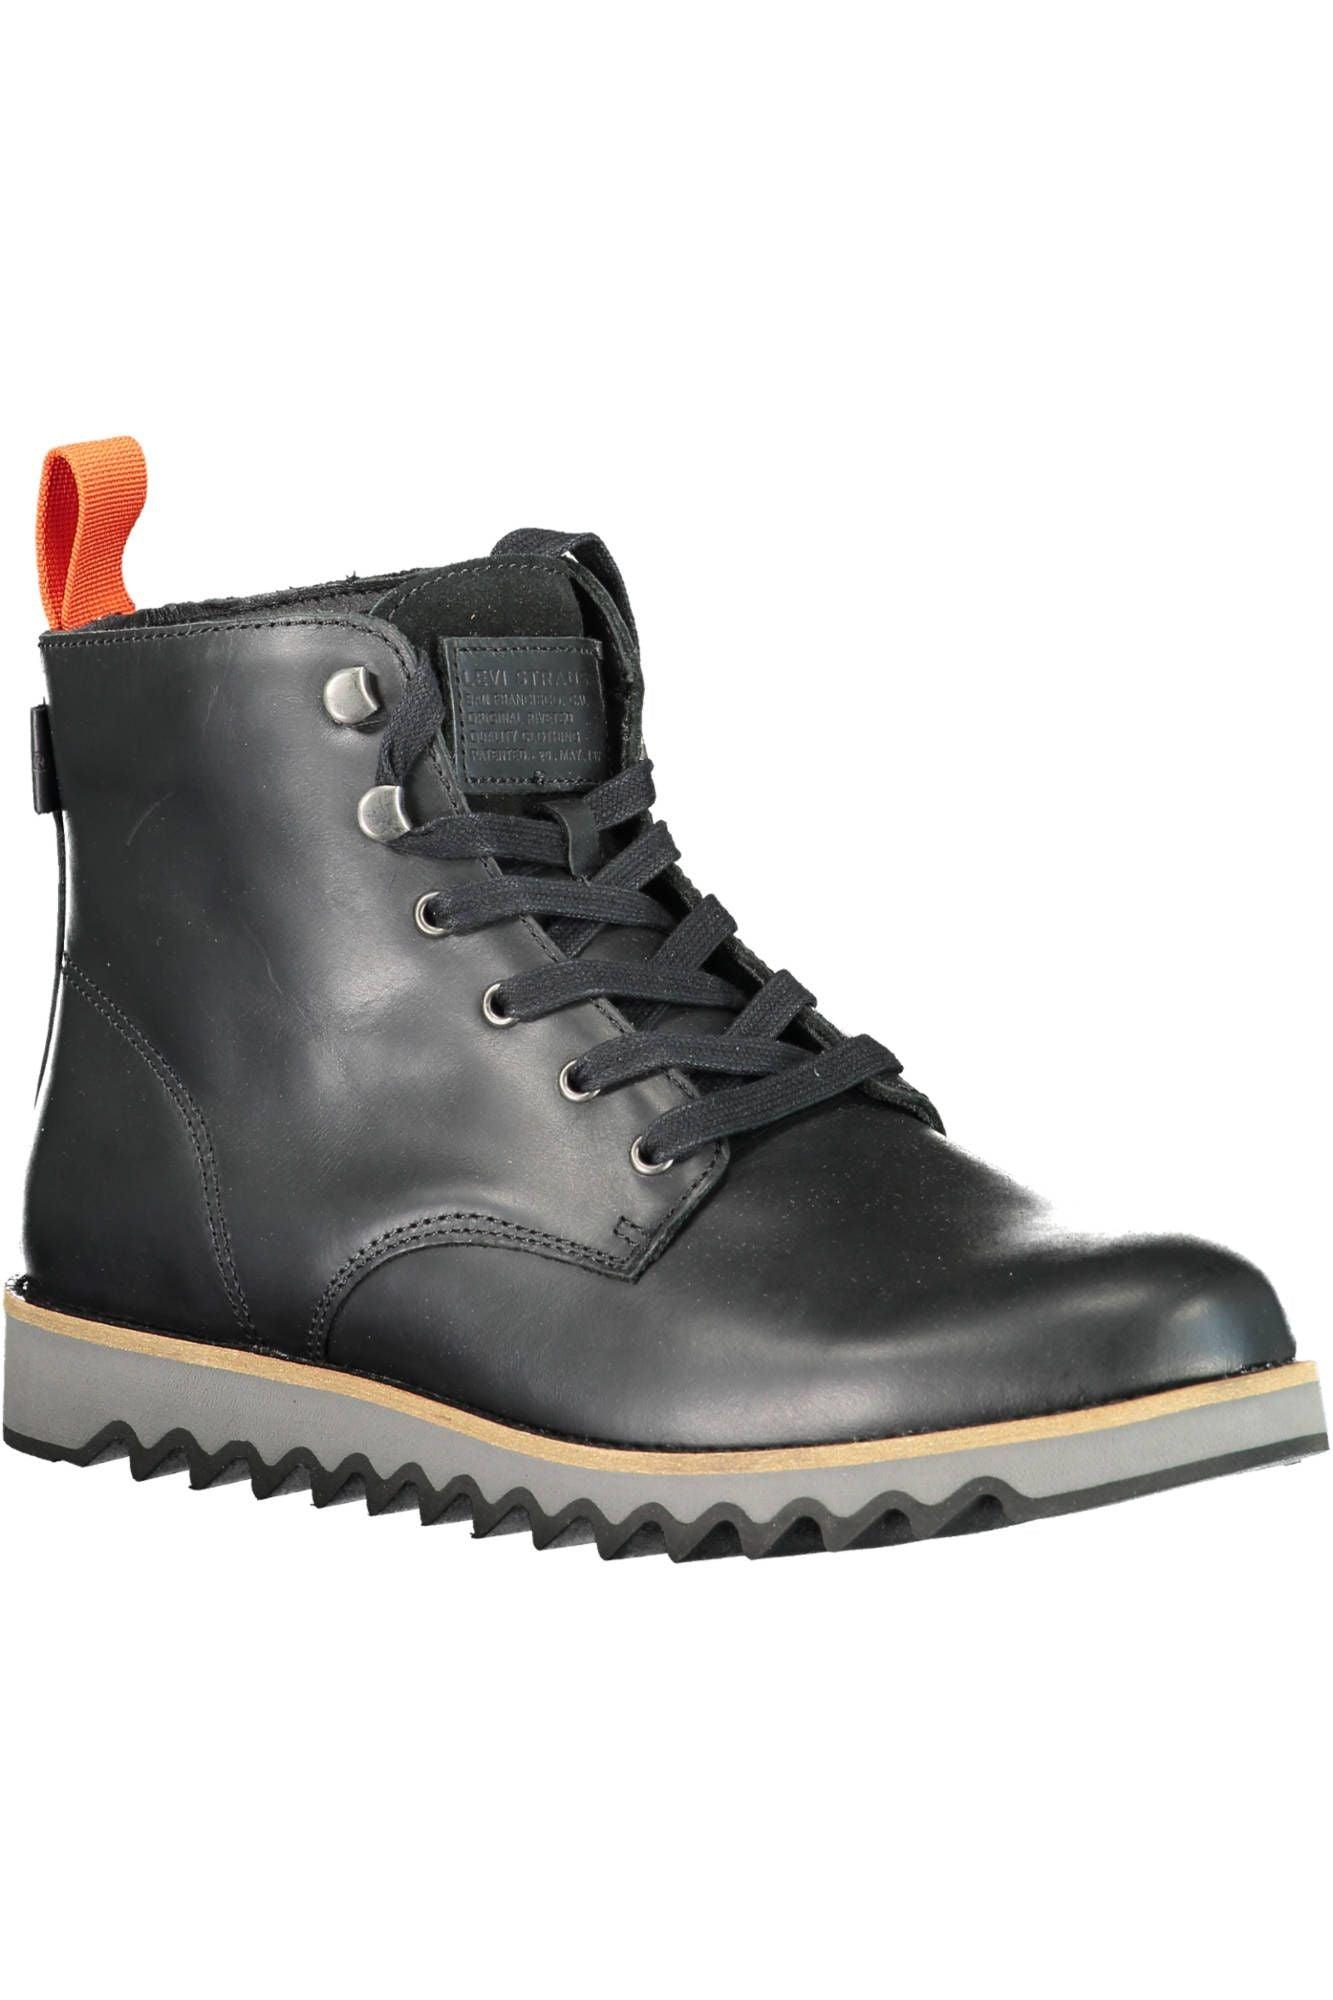 Levi's Elevated Black Ankle Boots with Contrasting Sole - PER.FASHION